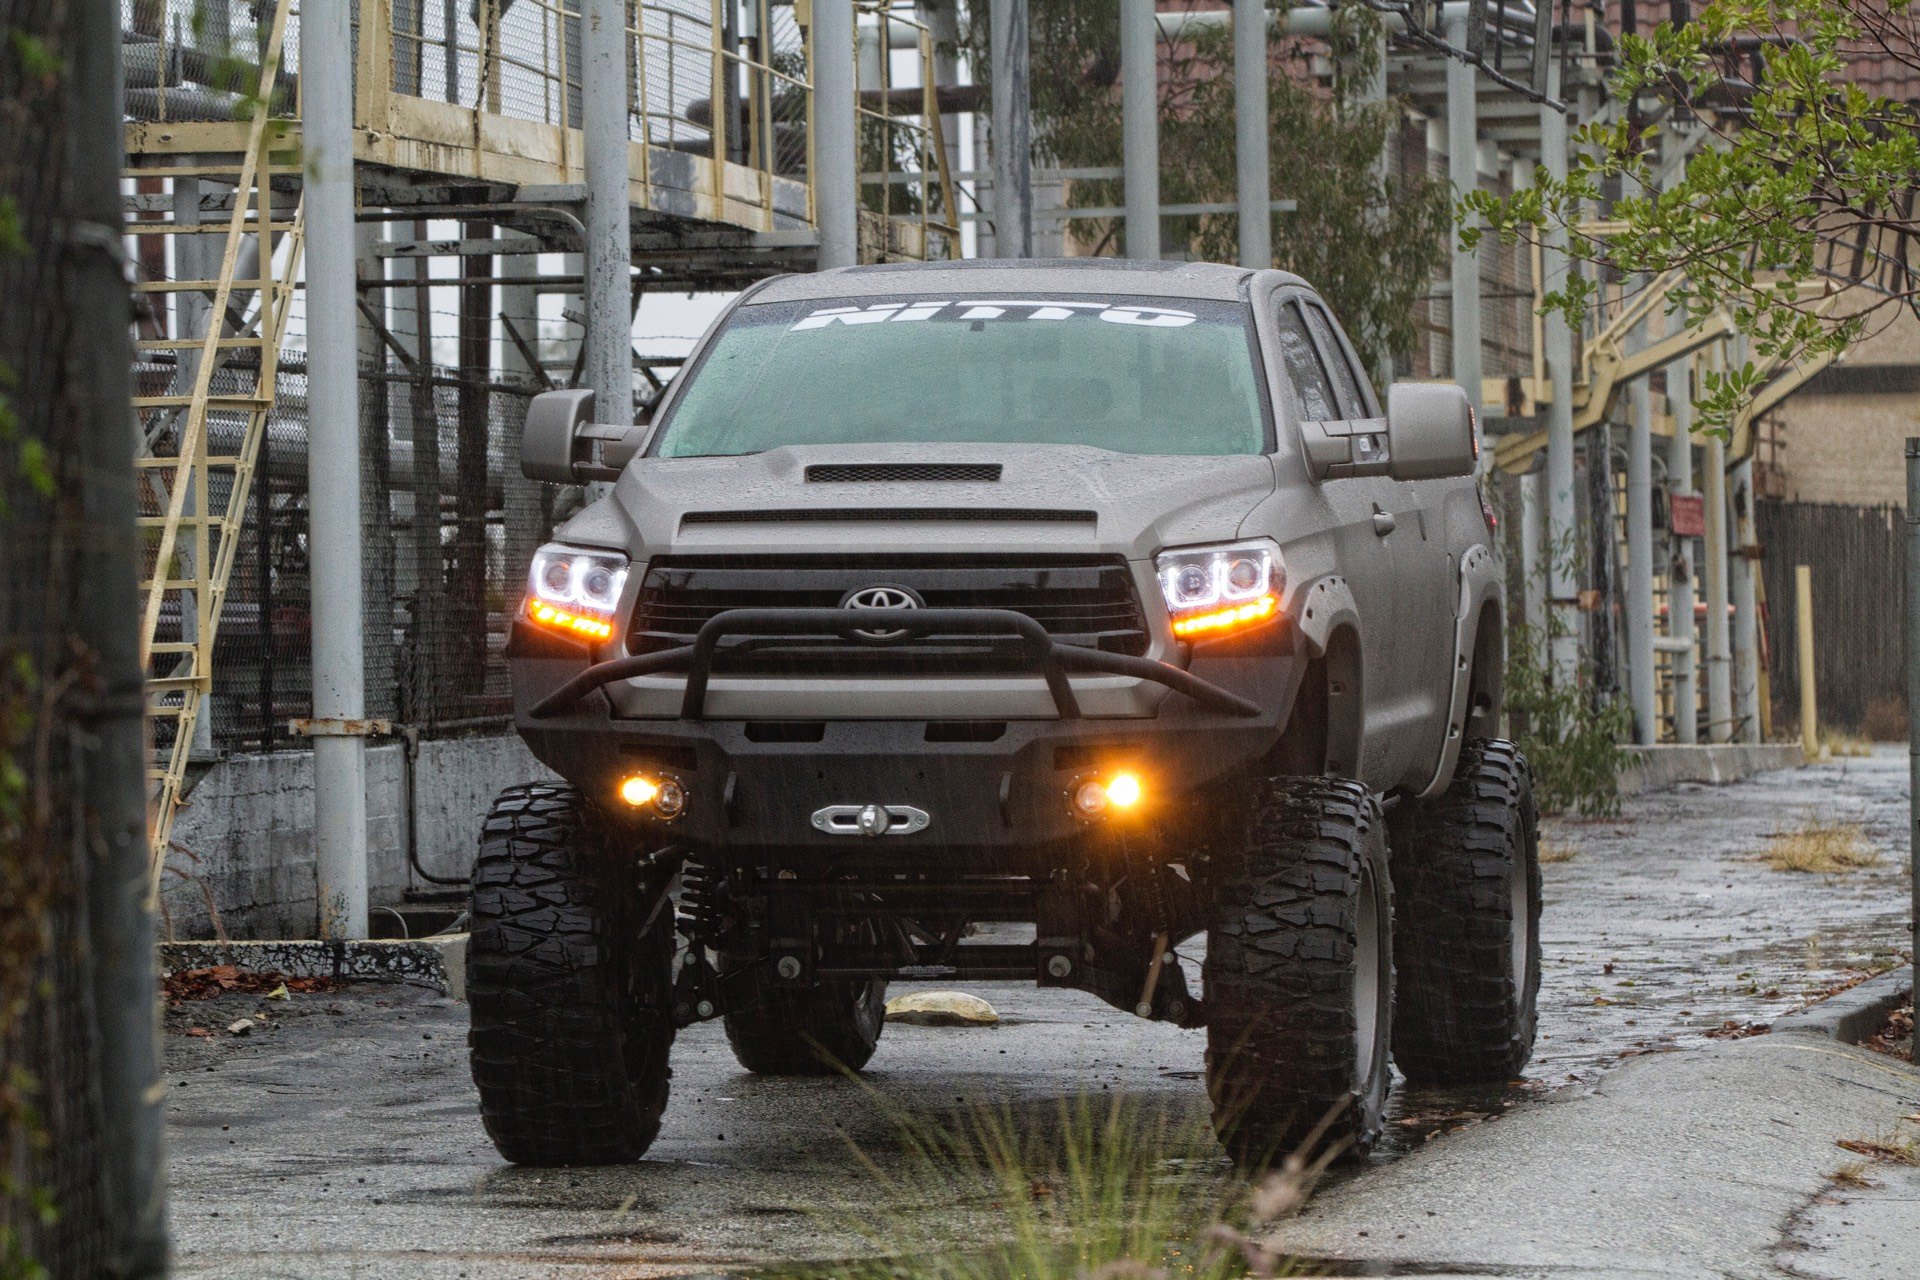 Toyota Tundra Ram Air Hood on Tundra - Photo by Fuel Off-Road